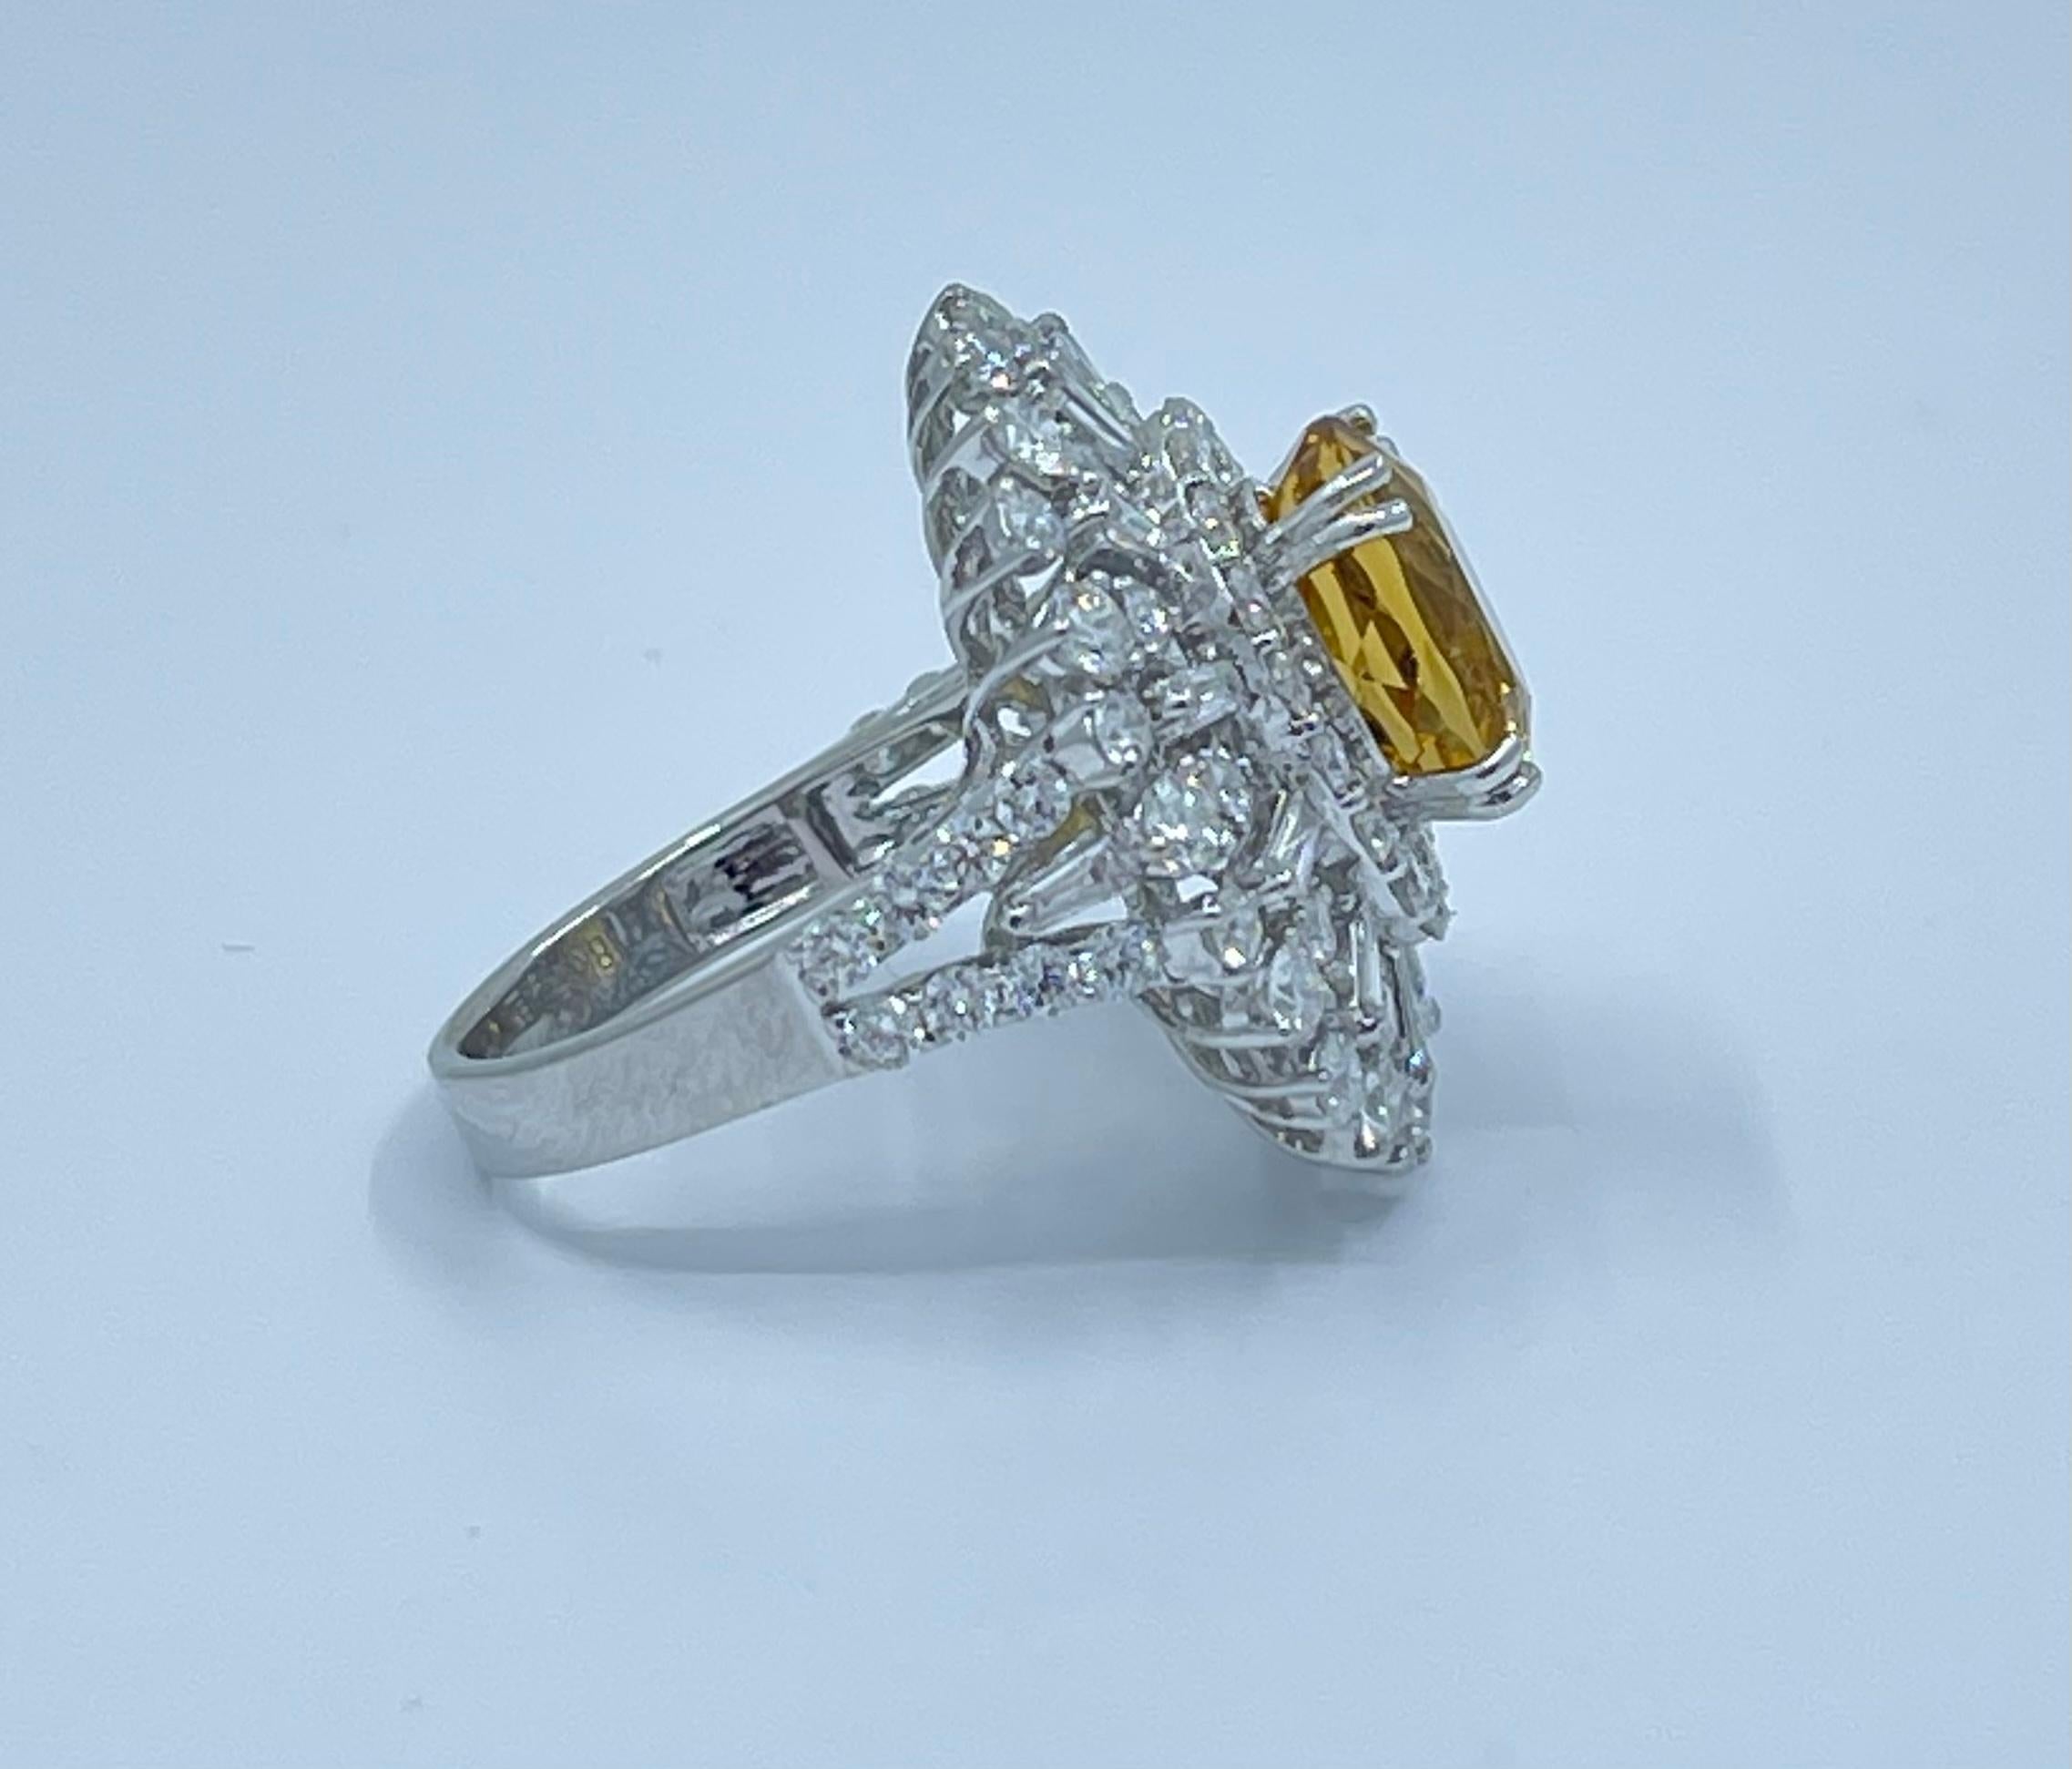 Oval Cut Exquisite 9.18 Precious Yellow Beryl or Heliodor and Diamond 18k White Gold Ring